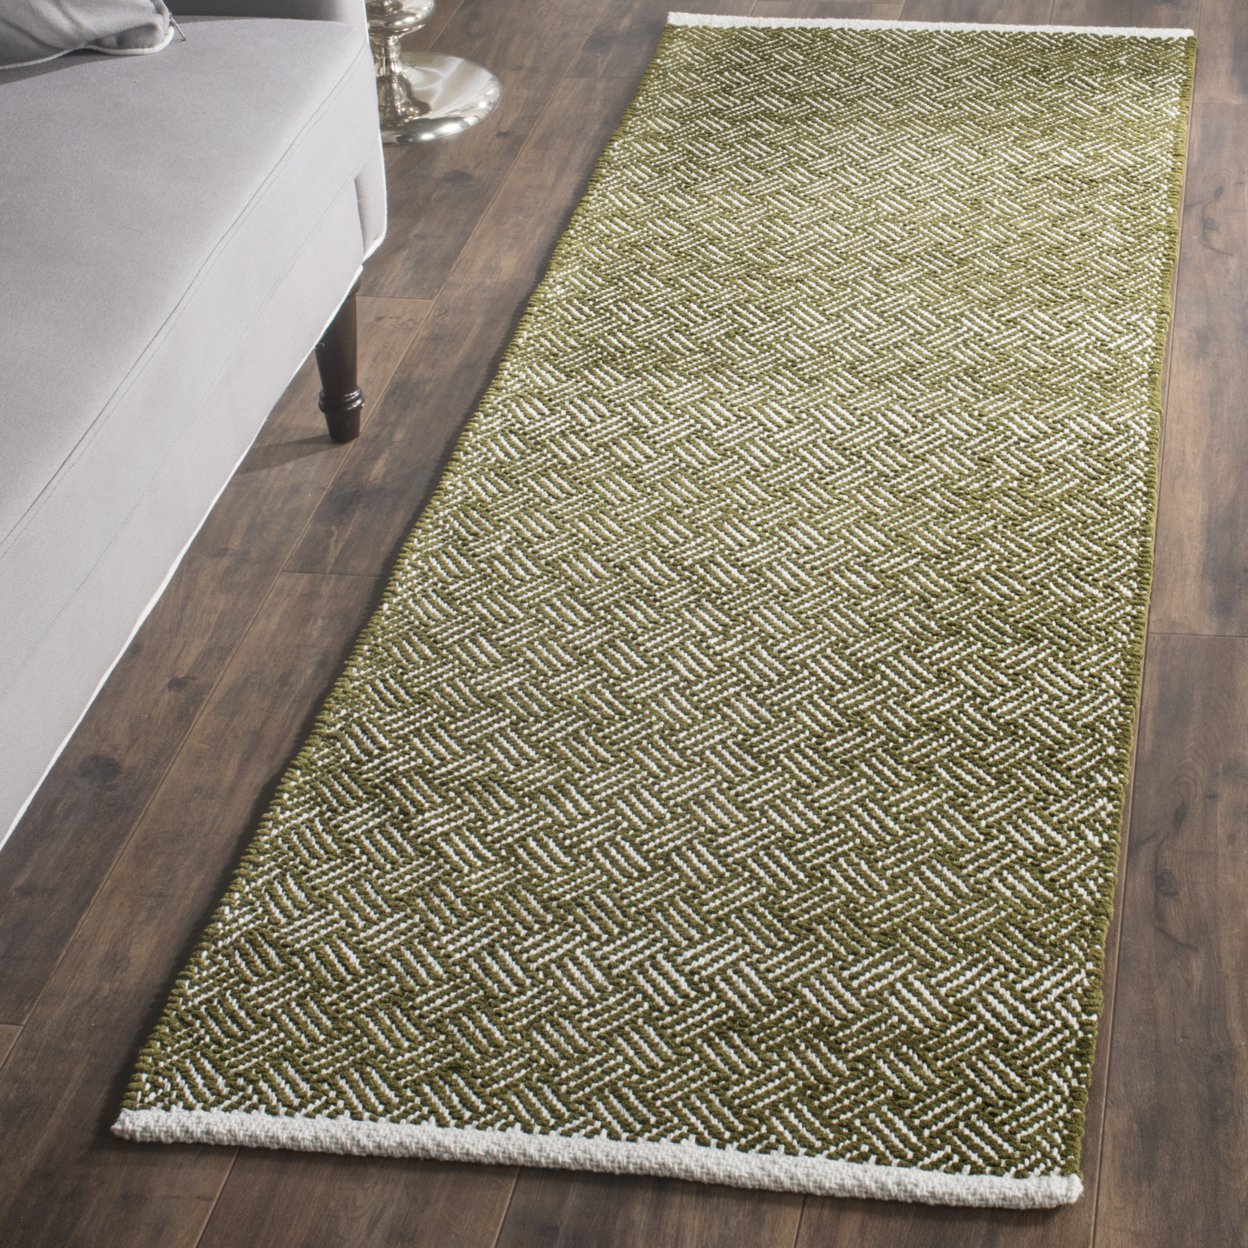 SAFAVIEH Boston Collection BOS680B Handwoven Olive Rug - 5' X 8'